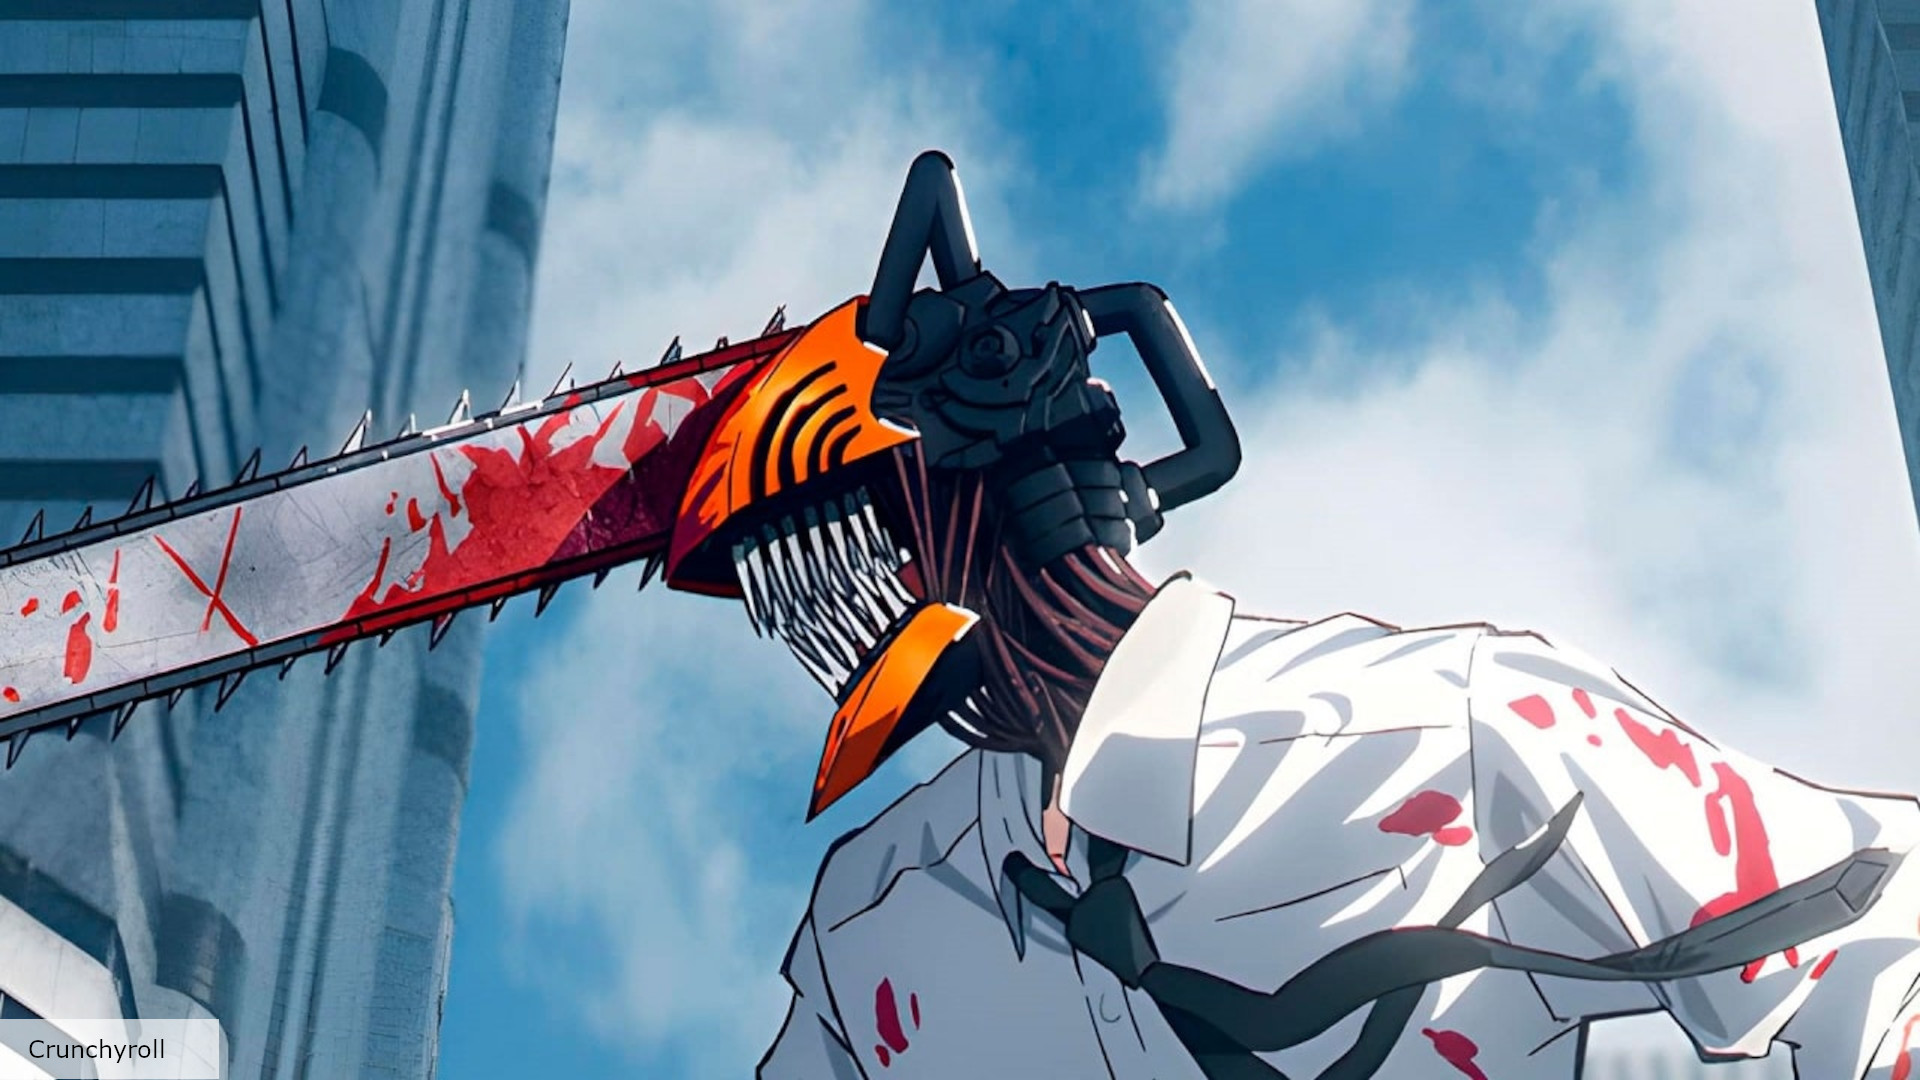 Chainsaw Man season 2: release date speculation, story, cast, and more